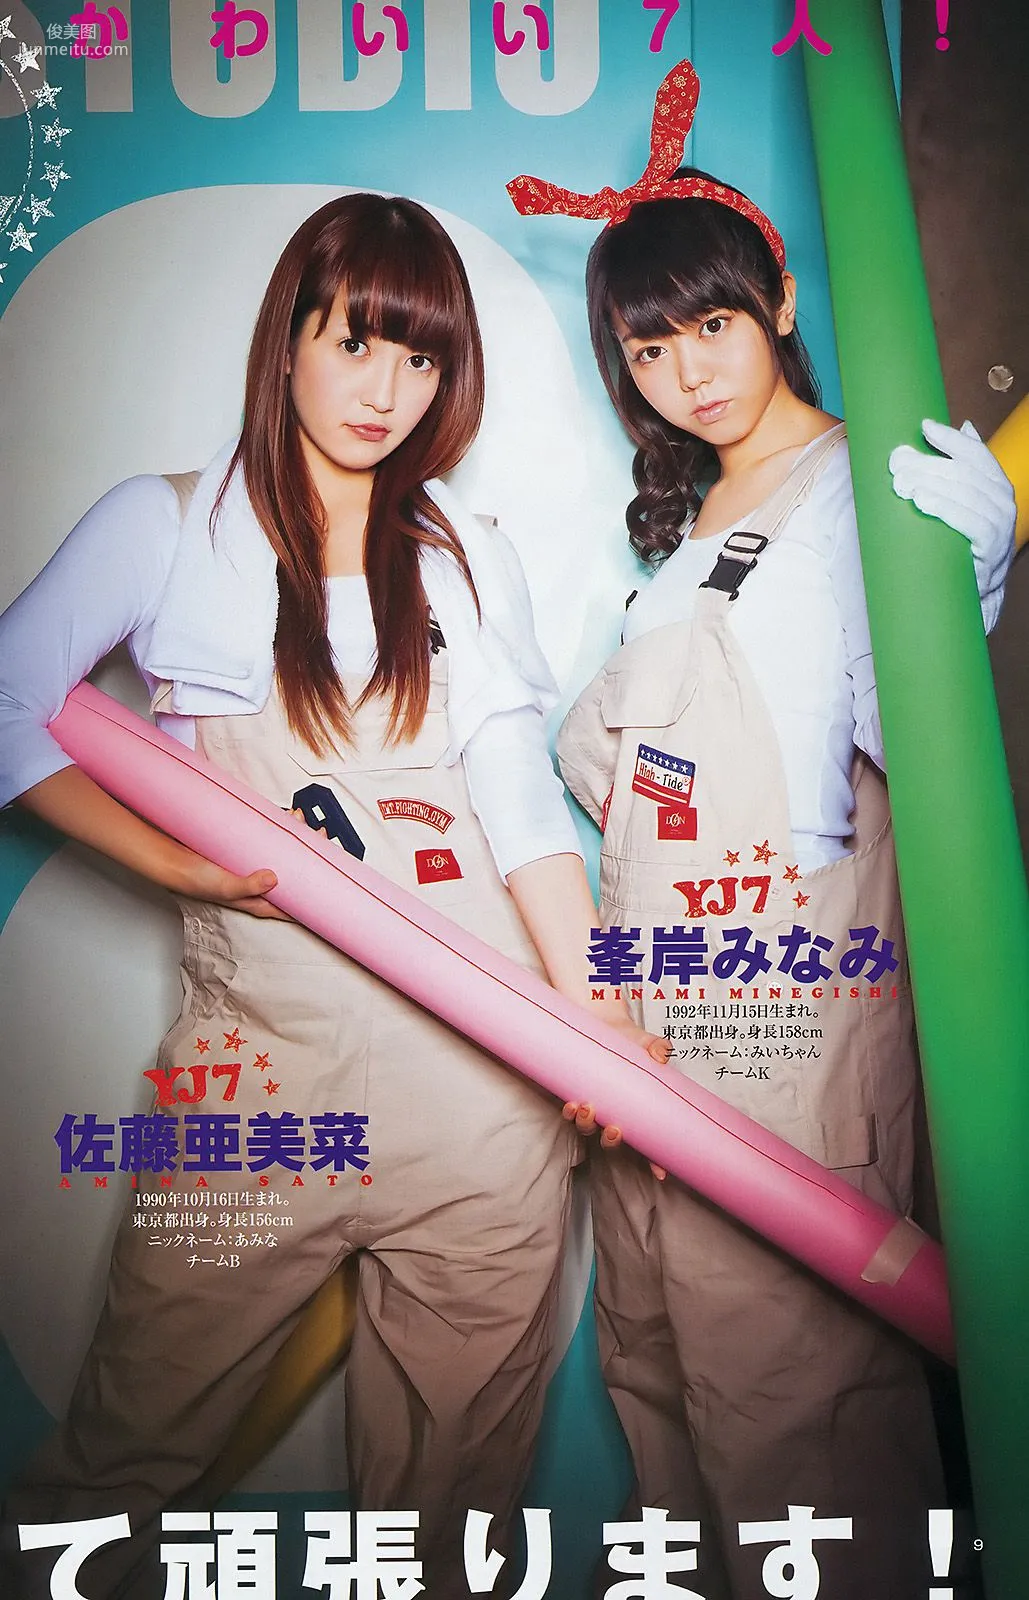 AKB48 YJ7 vs. YM7 神保町・護国寺大戦 FINAL PARTY [Weekly Young Jump] 2012年No.01 写真杂志10